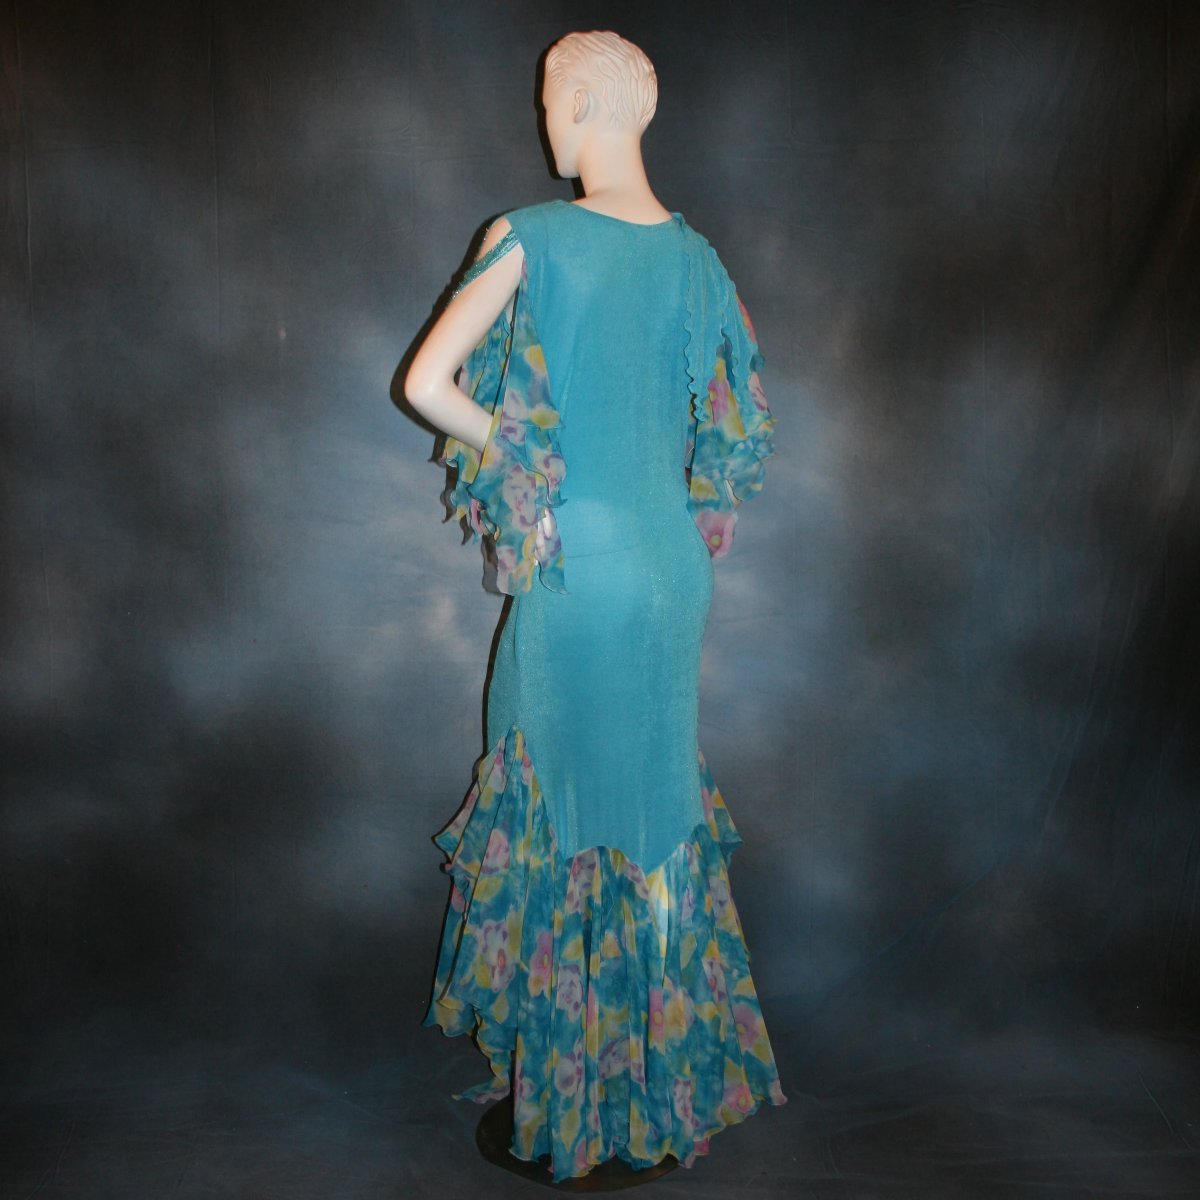 back view of Blue social ballroom dress of luxurious robin egg blue slinky, print chiffon flounces & floats with touches of orchid & yellow, embellished with Swarovski hand beading, is lovely for any ballroom dance or special occasion, and a fabulous beginner ballroom dancer show dress!